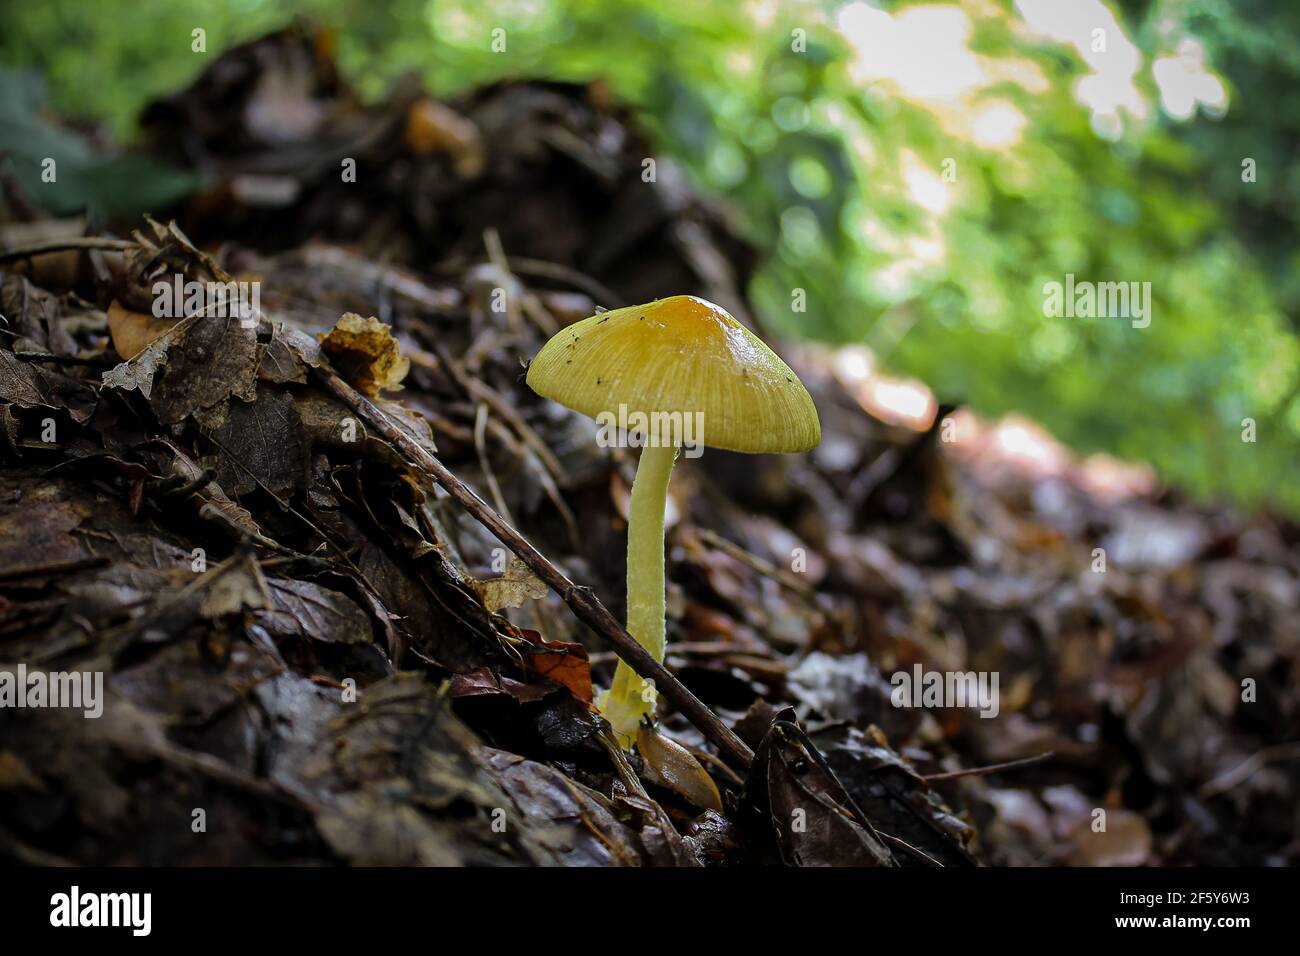 Wild mushroom that grows among the leaves in the forest in spring. Death cap mushroom (Amanita phalloides) Italy-Europe- Close up. Stock Photo